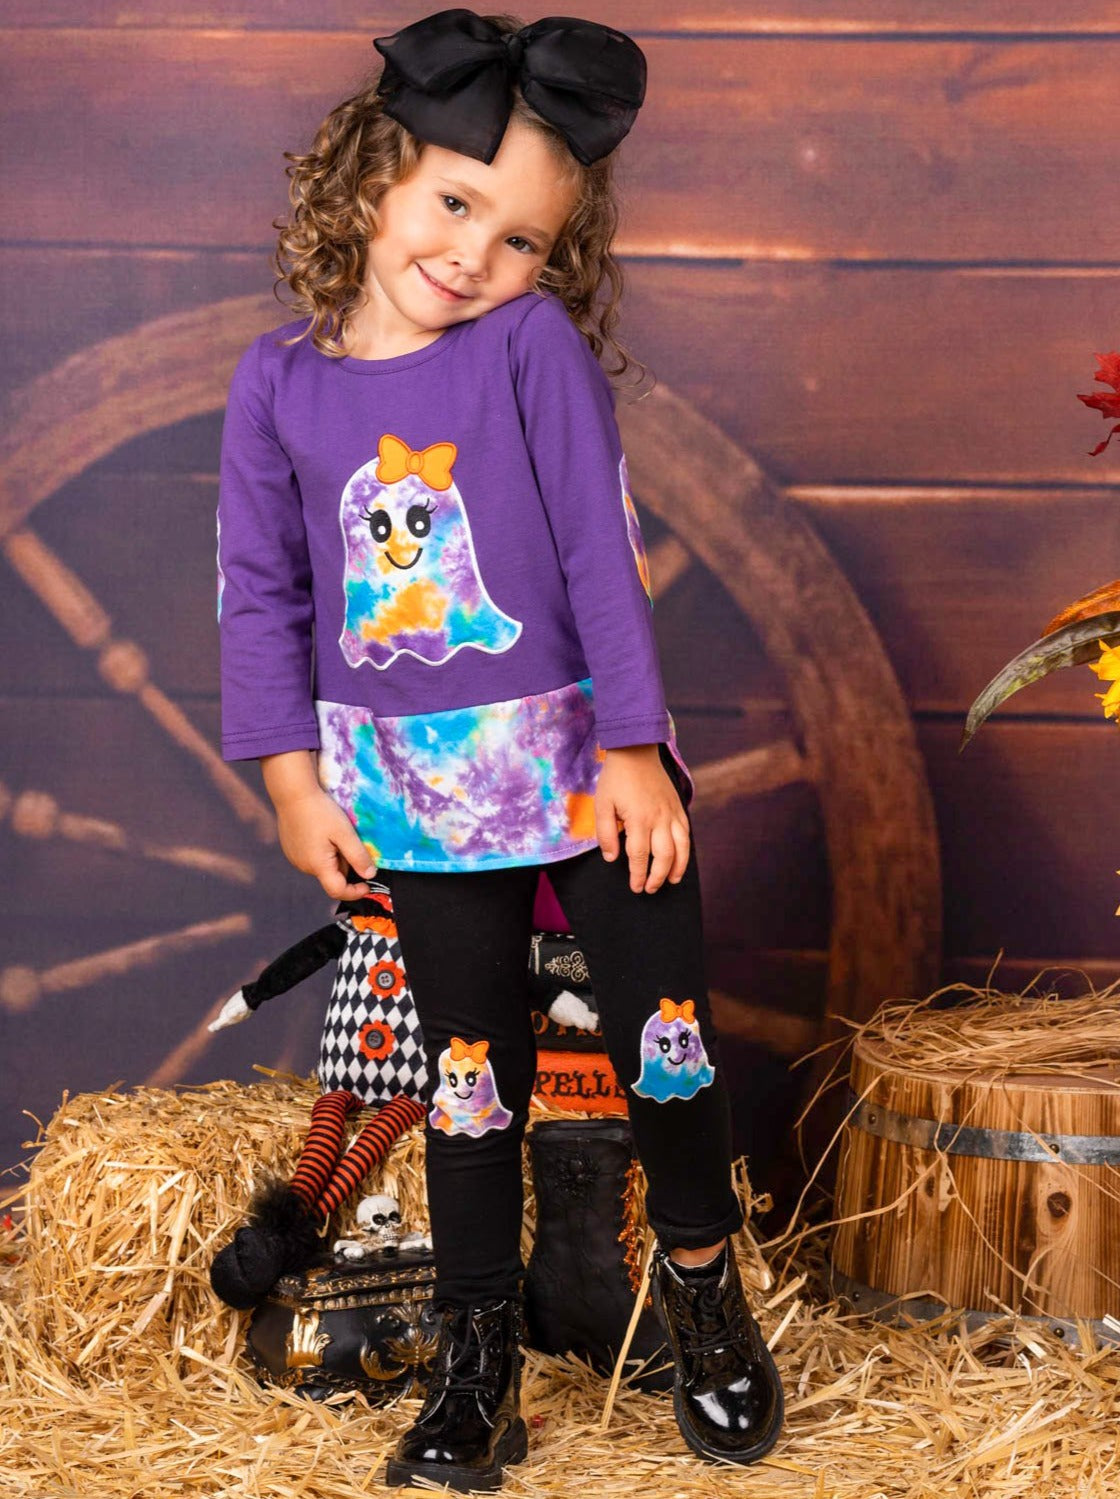 Little girls Halloween long-sleeve tunic top with tie-dye ghost girl applique, tie-dye elbow patches, hem, and black leggings with matching ghost knee patches - Mia Belle Girls